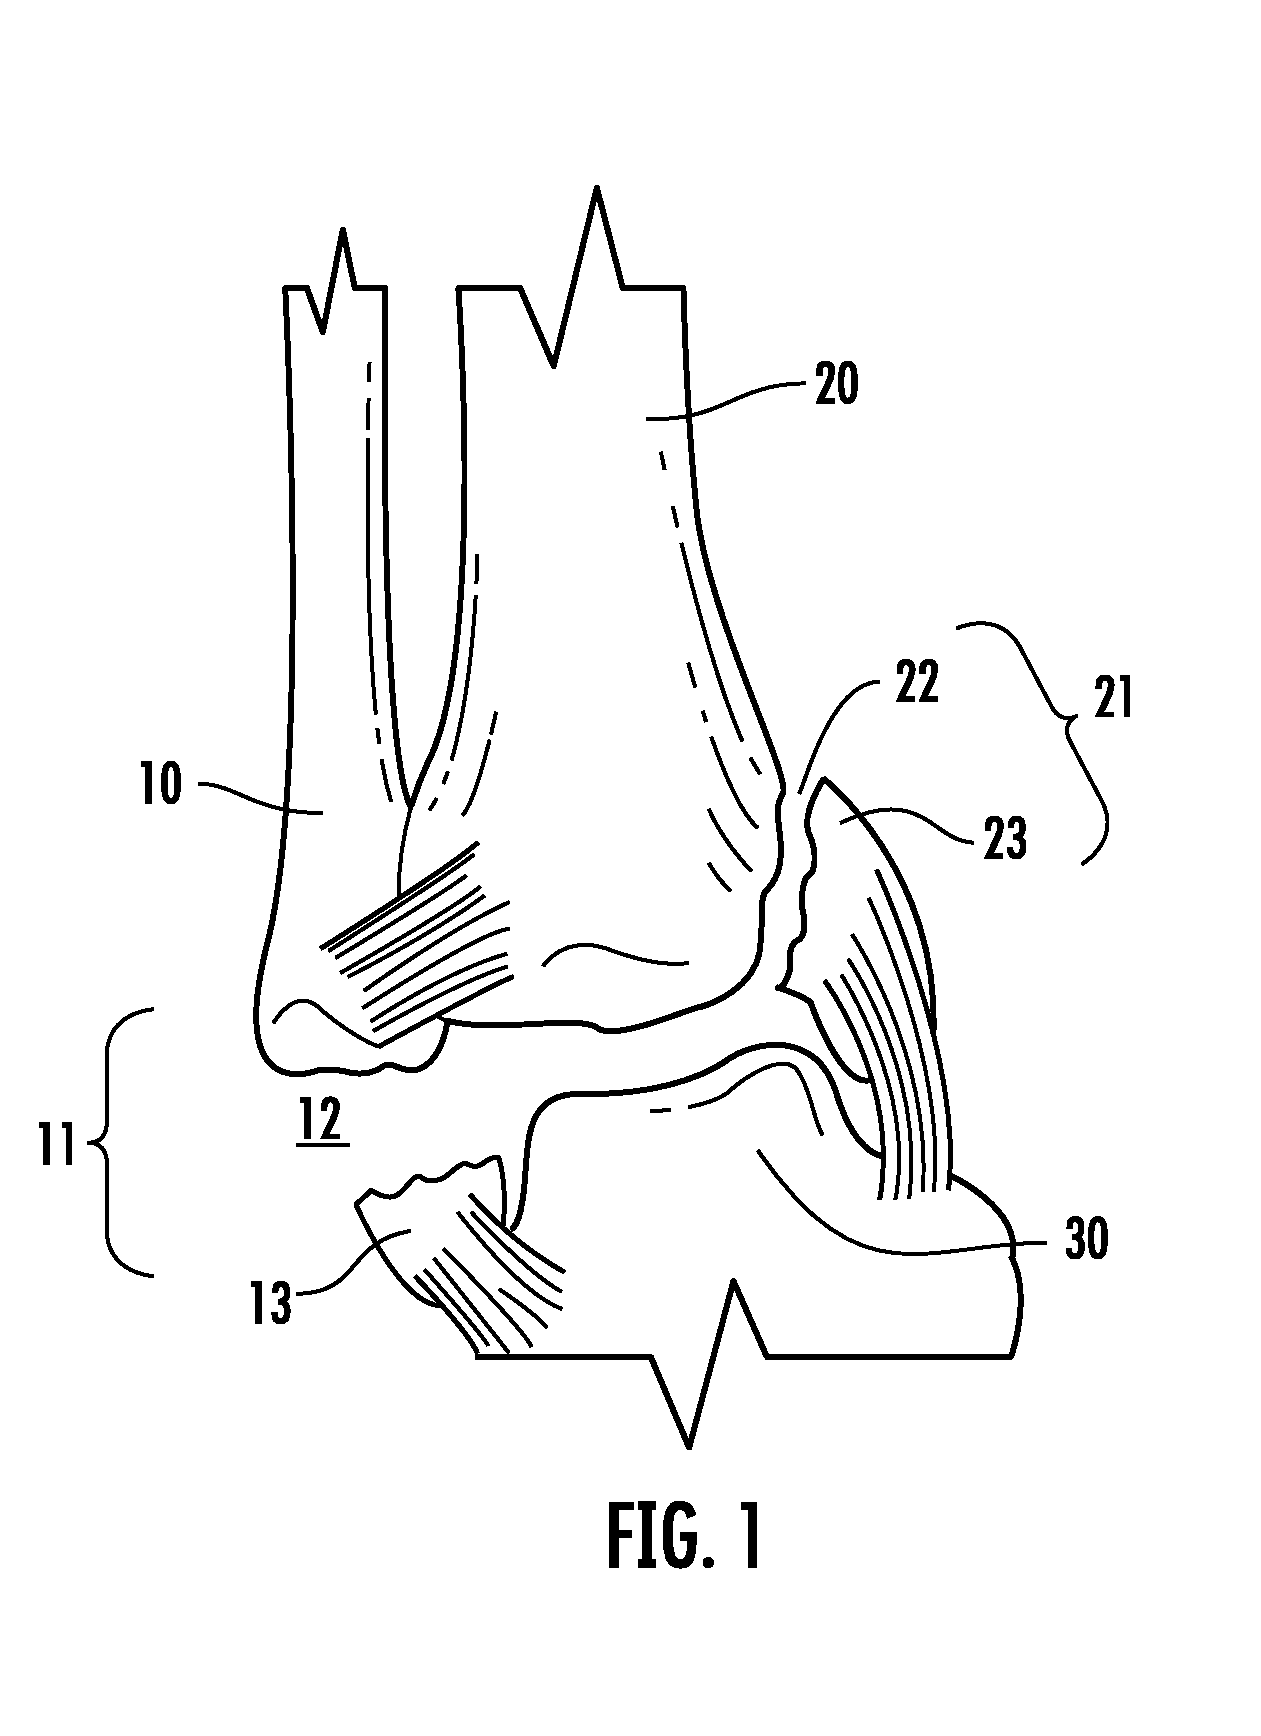 Contoured bone plate for fracture fixation having hook members